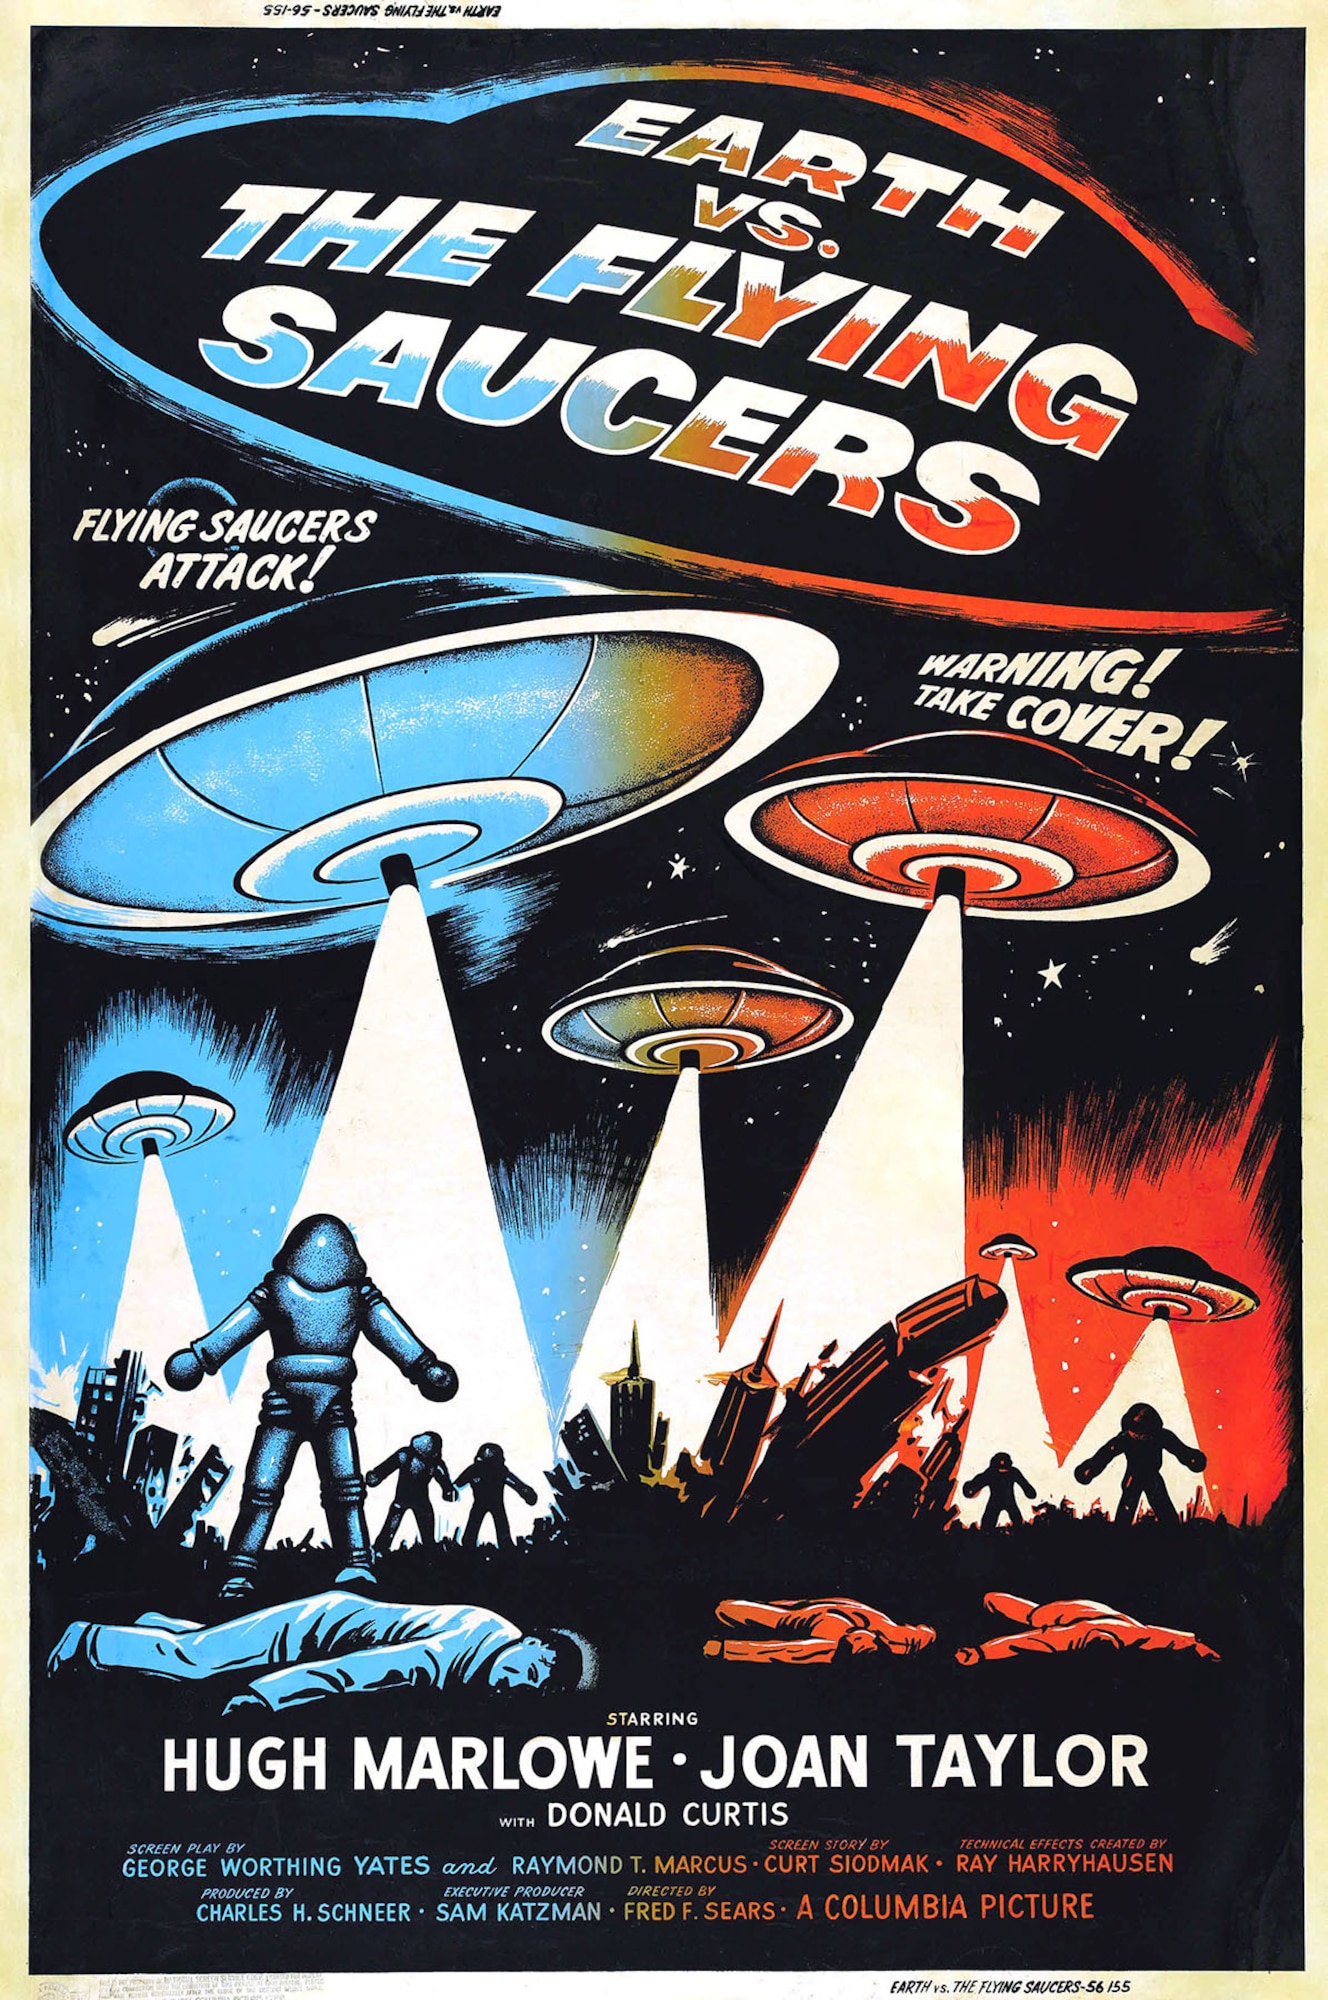 Science fiction movies in the 1950s often featured “flying saucers” from Outer Space, and the circular shape of the Avrocar invited a comparison in the public’s mind.